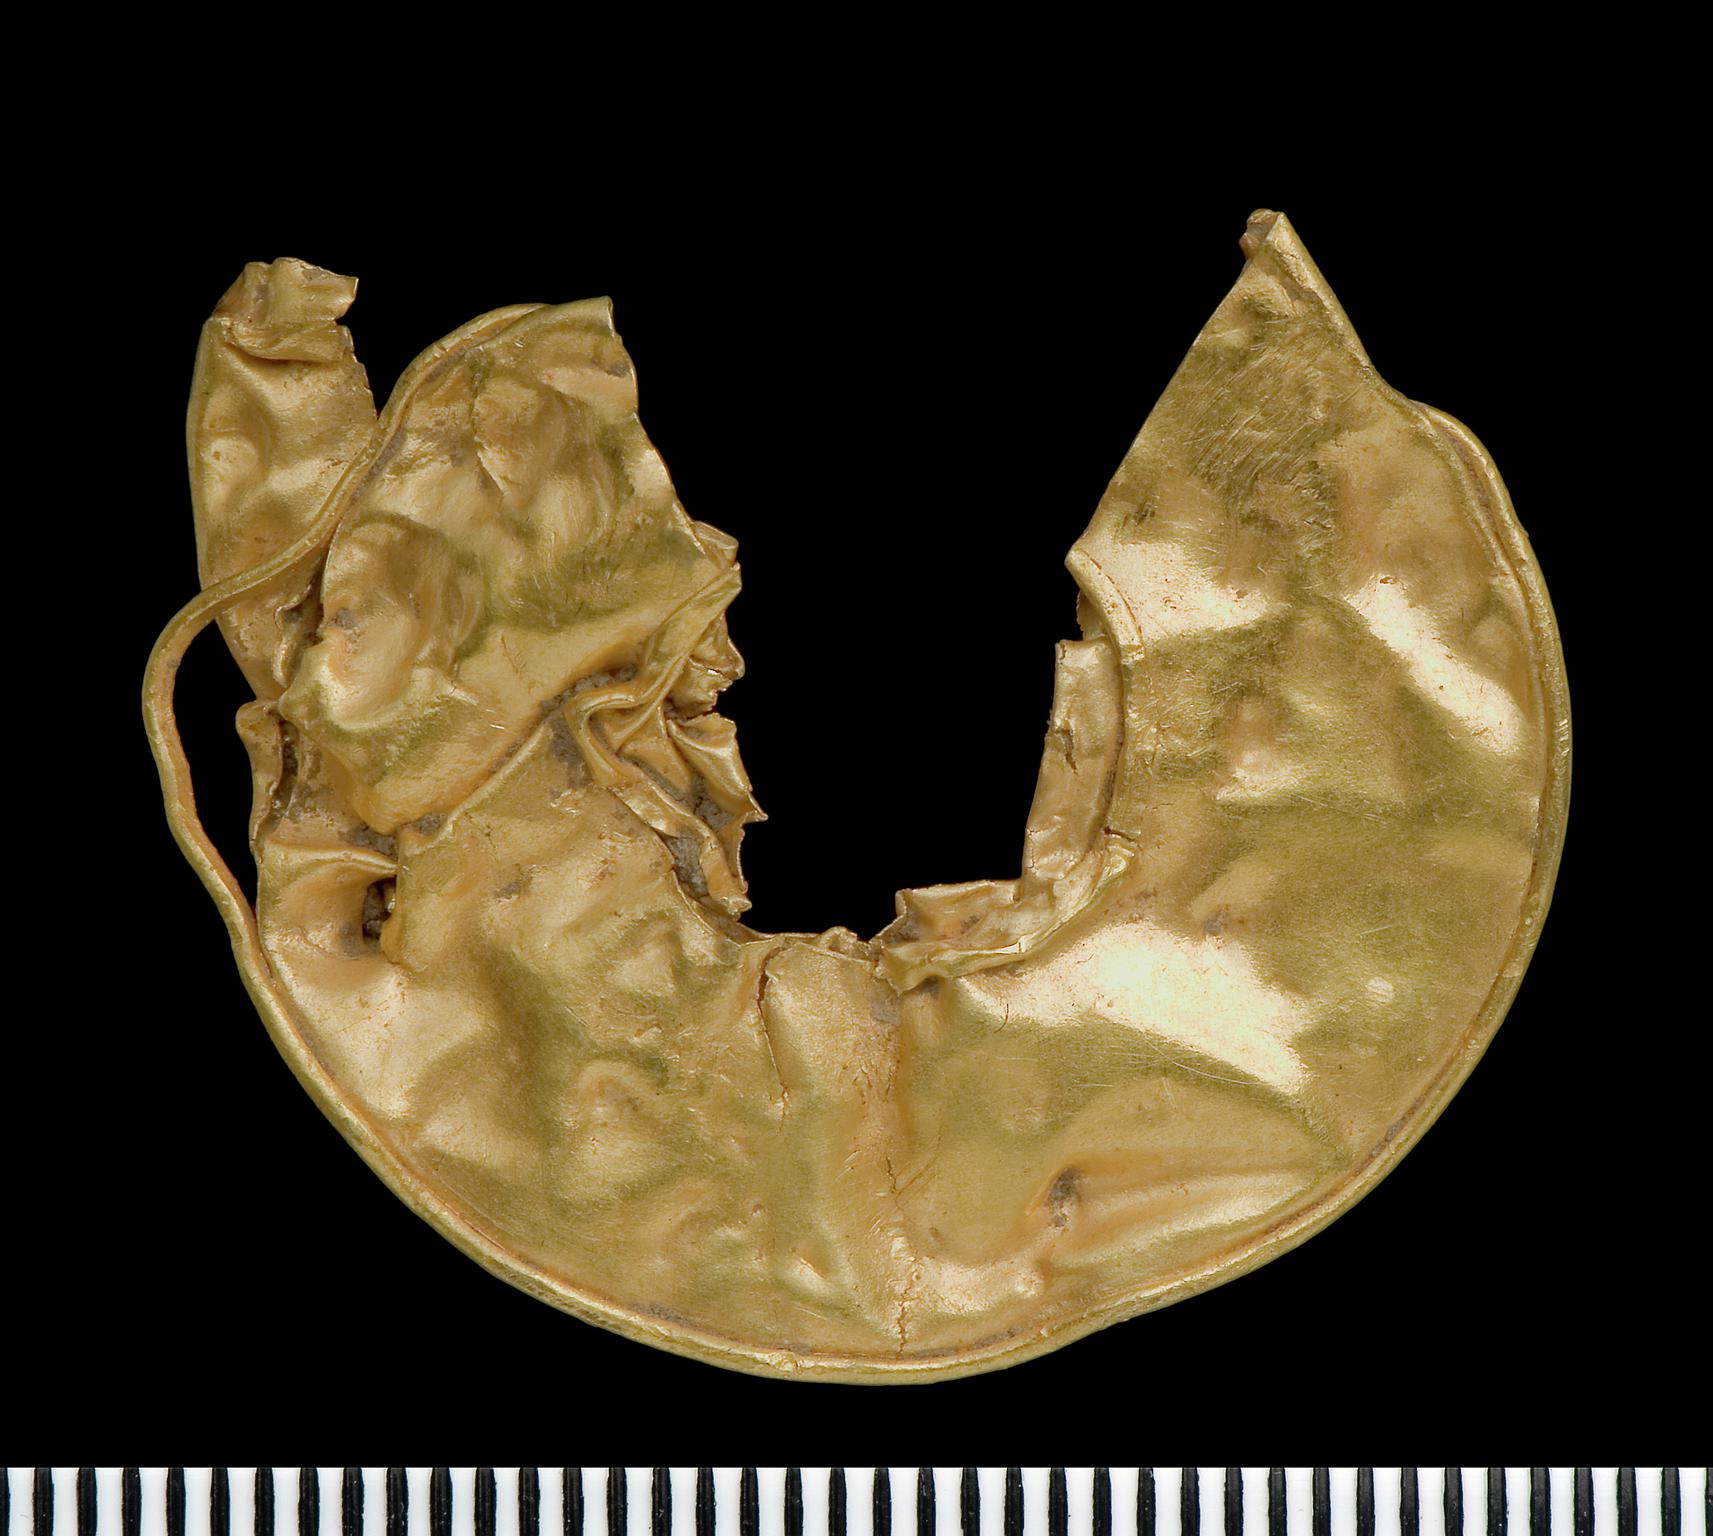 Late Bronze Age gold lock ring